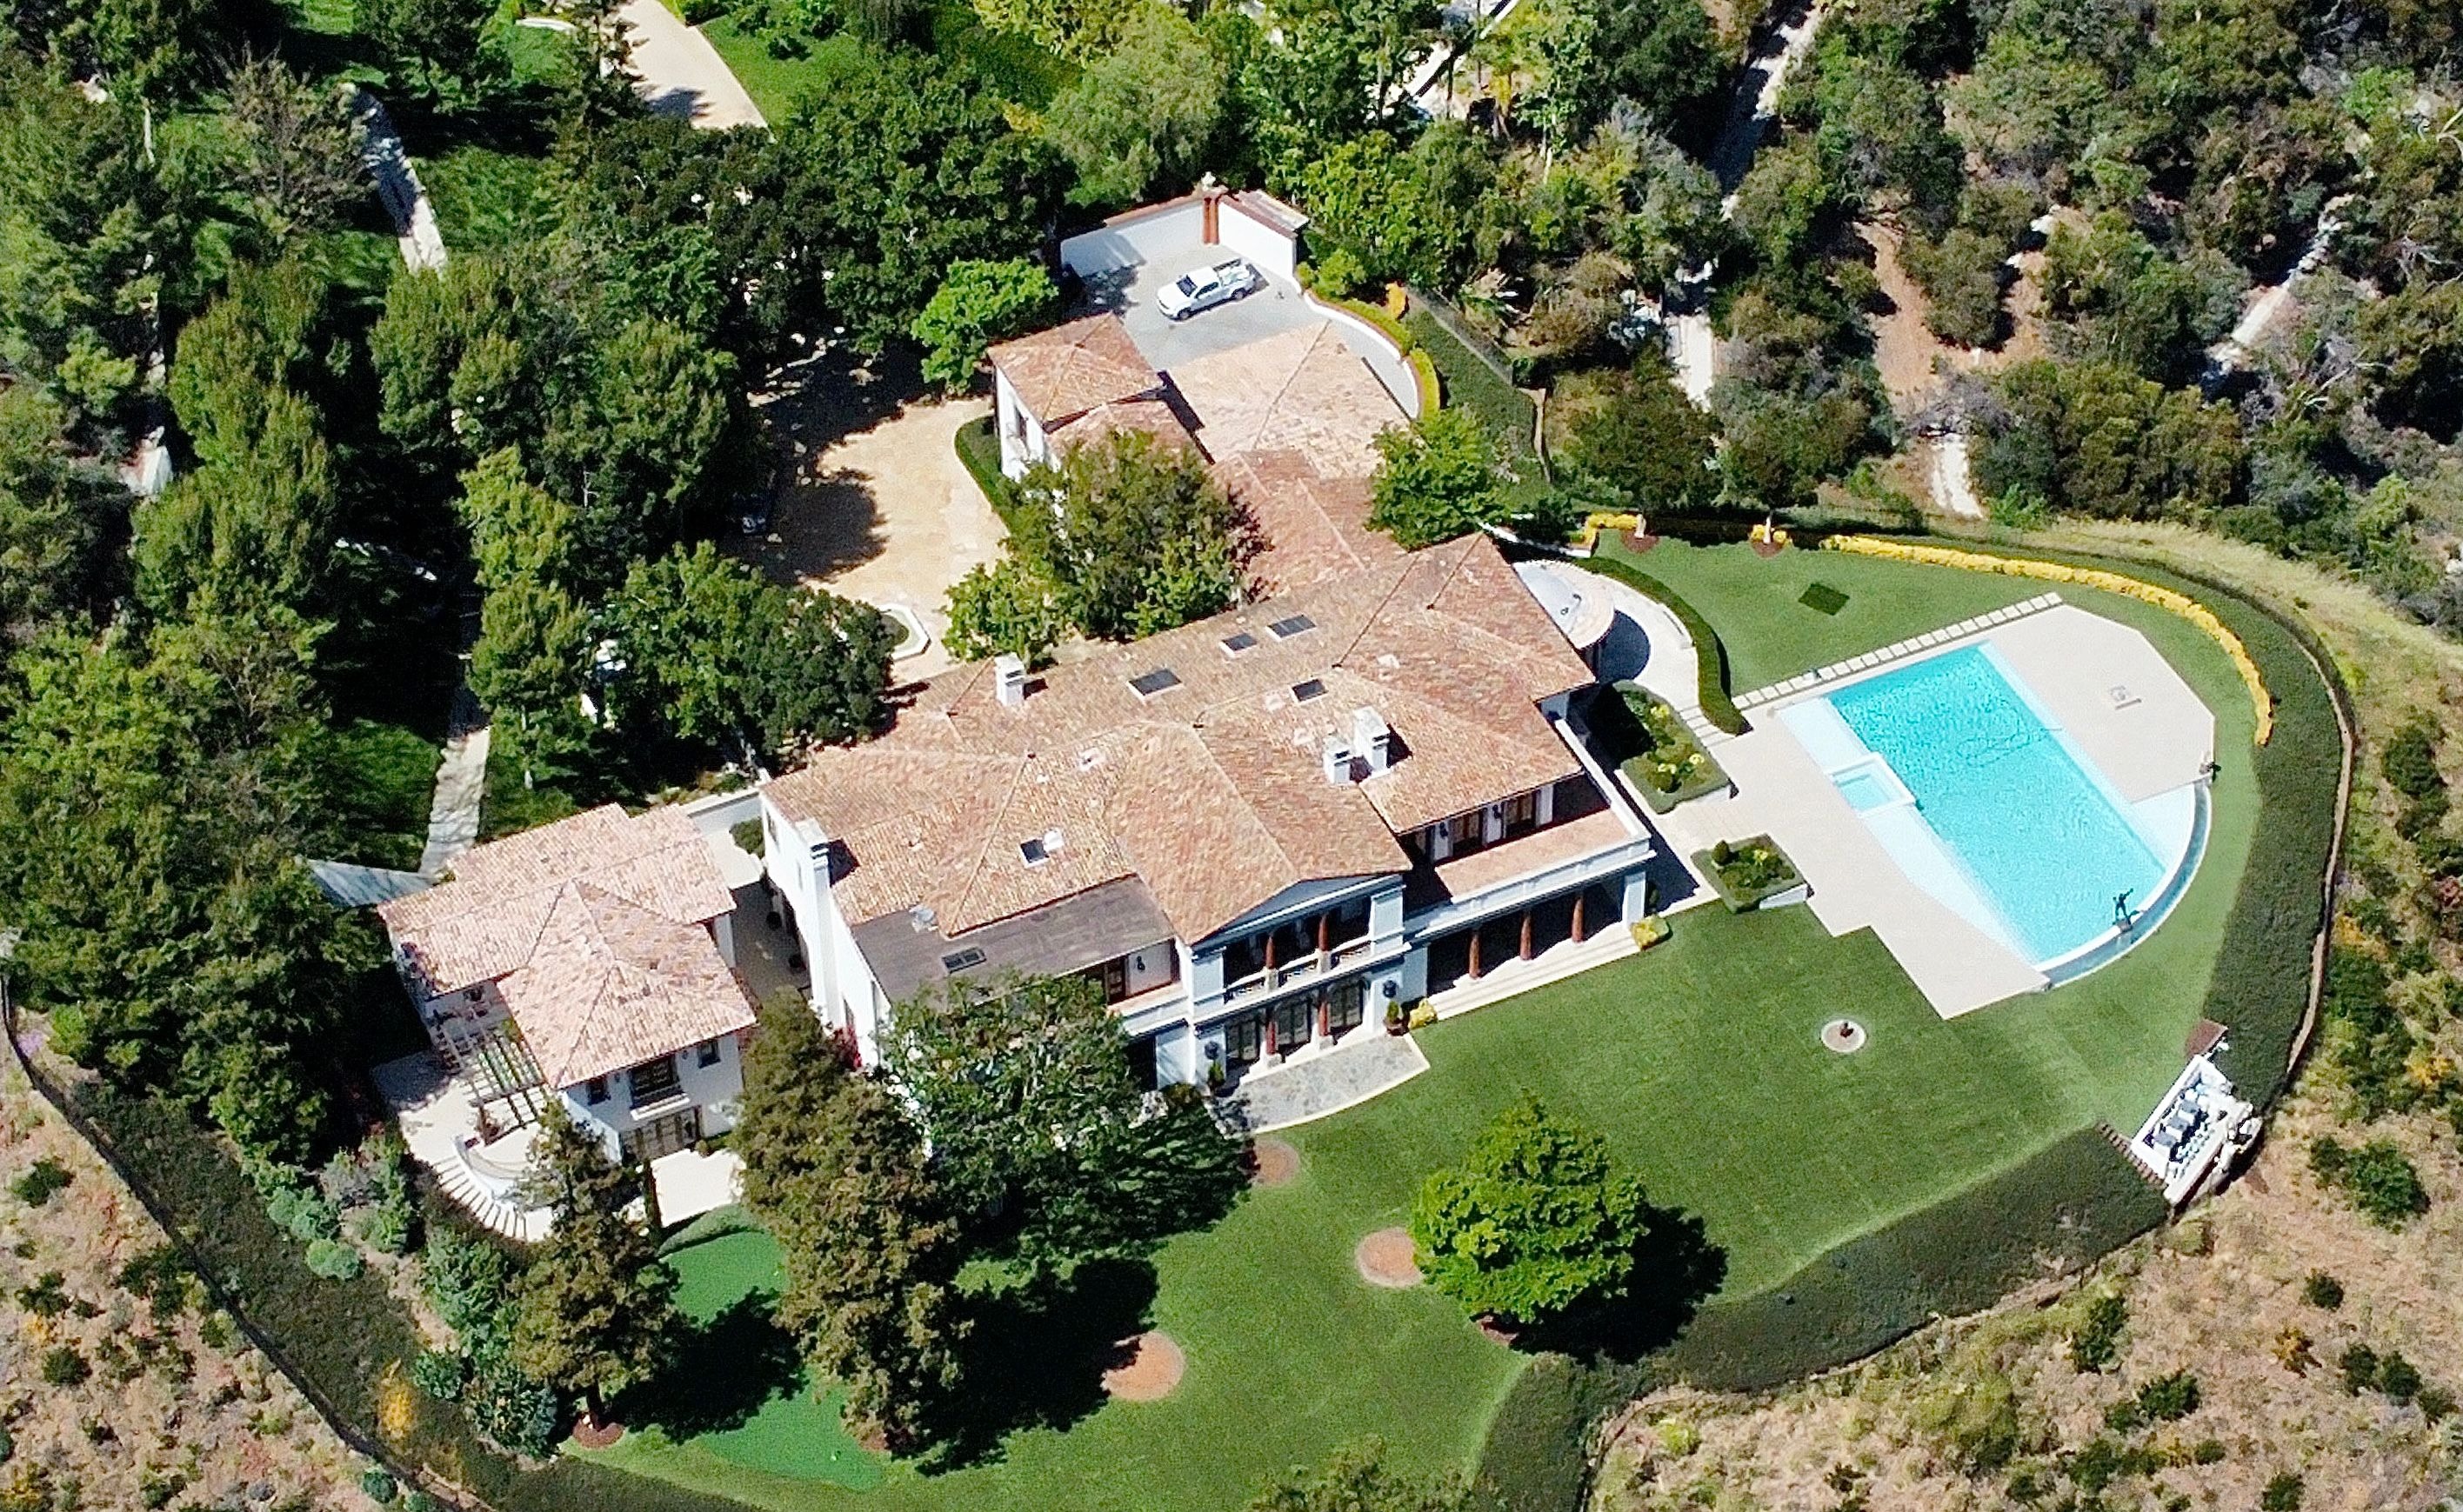 The Hello singer purchased the property from Sylvester Stallone two years ago